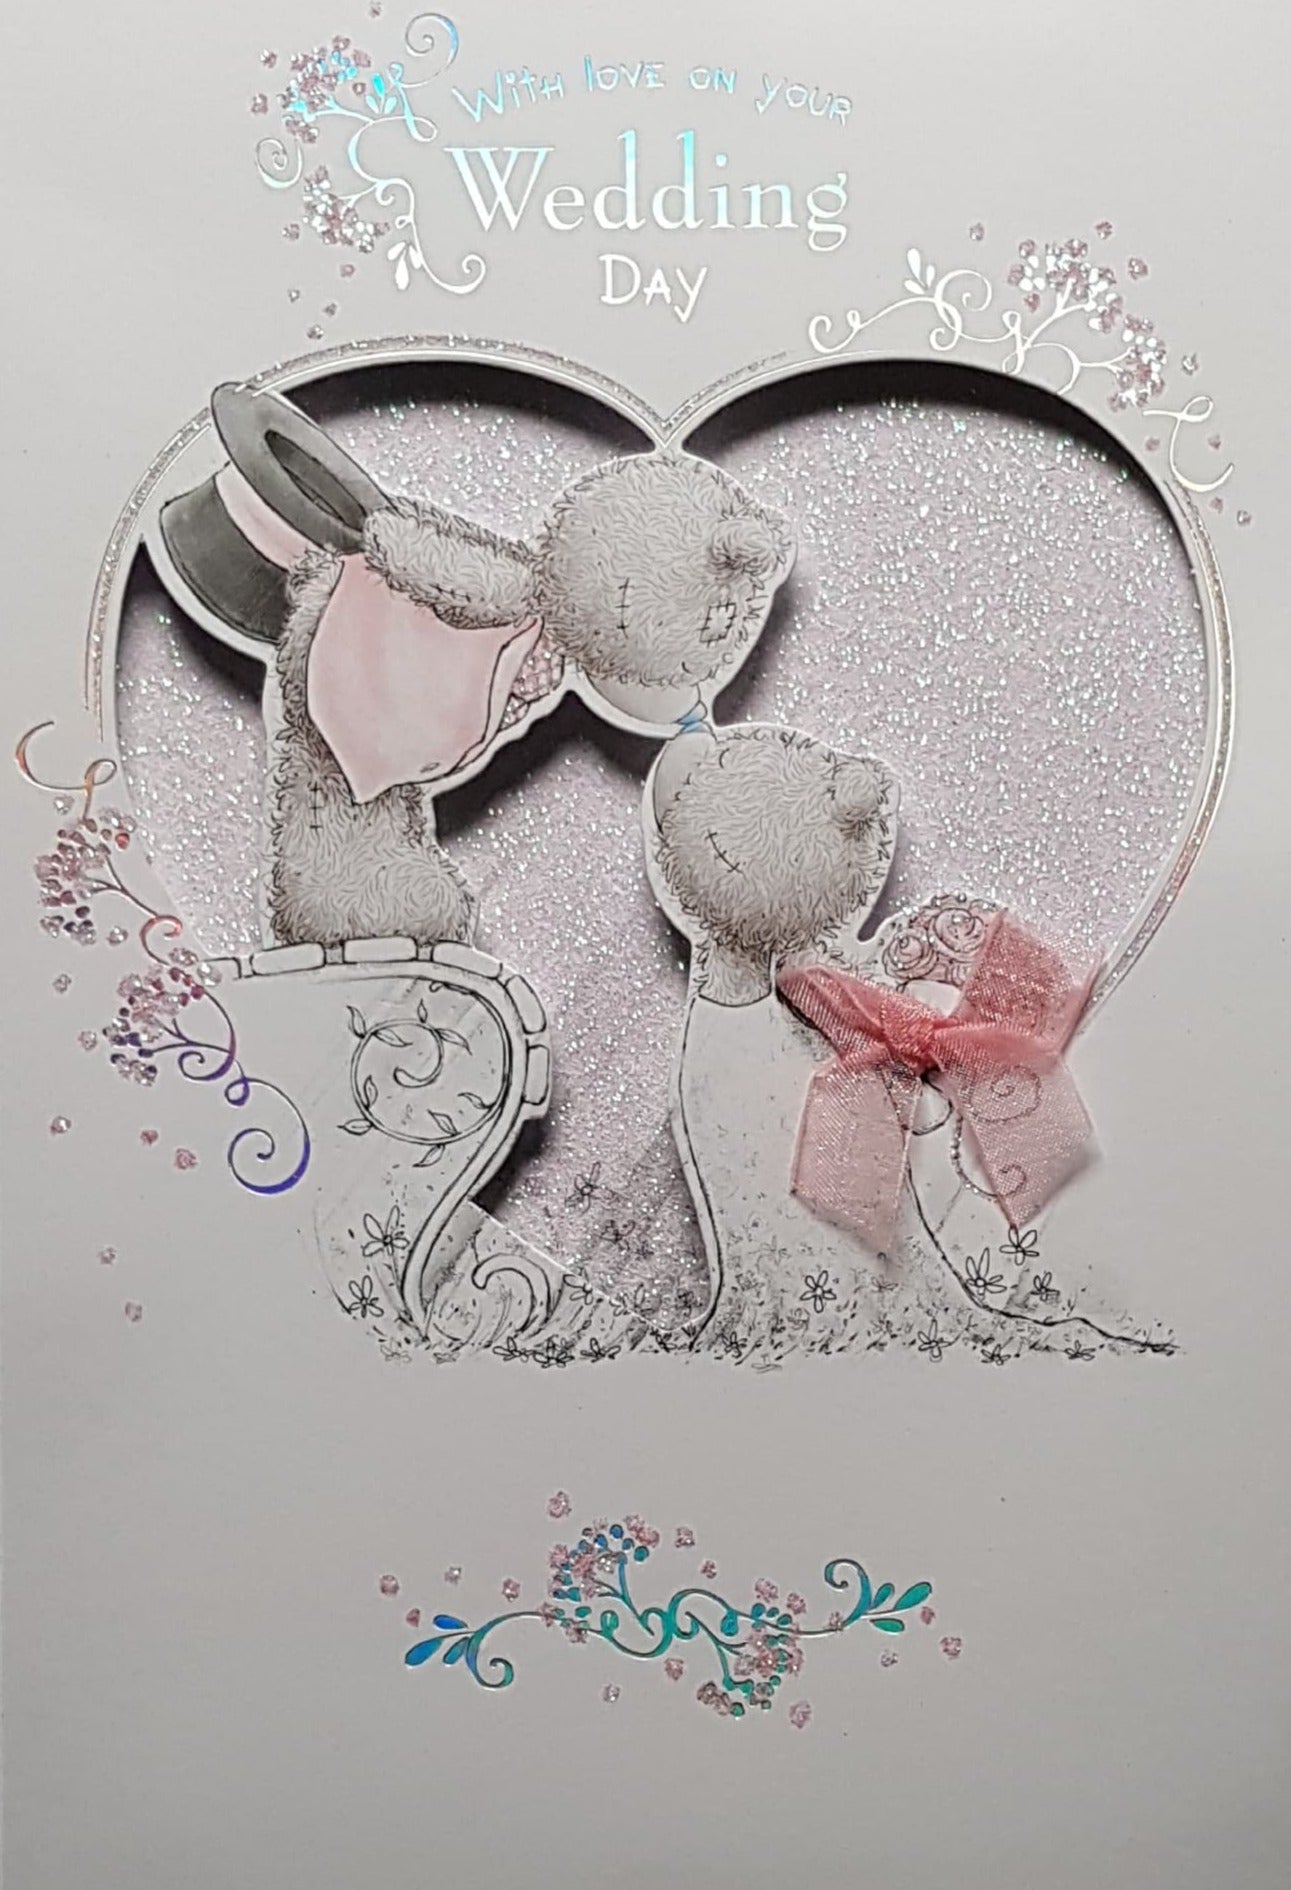 Wedding Card - With Love On Your Wedding Day/ Groom & Bride Teddies Touching Noses